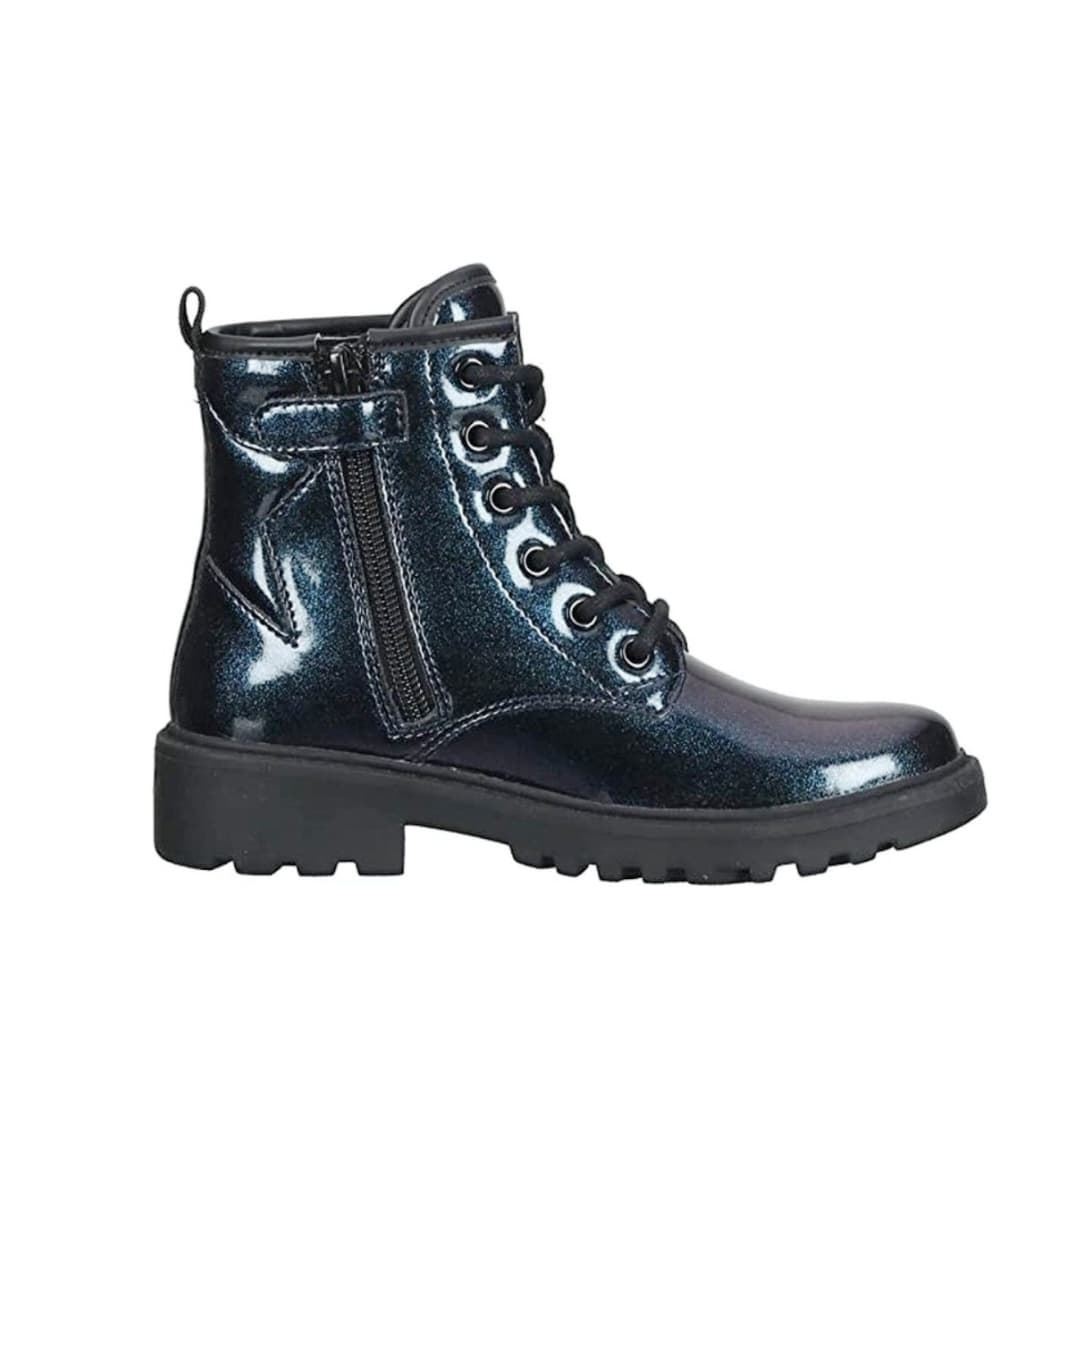 Geox Girls Boots Casey Patent Leather Metallic Blue - Image 2